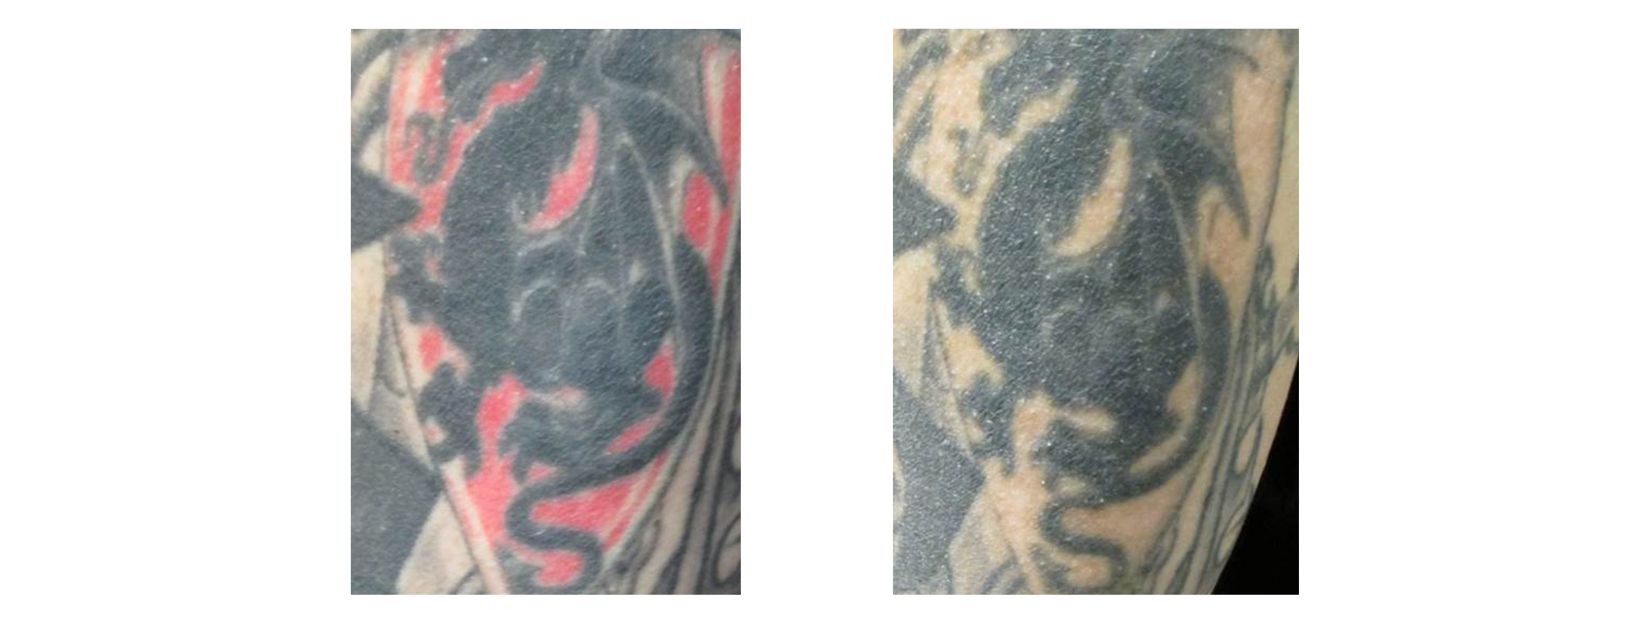 Tattoo Removal Colour Red